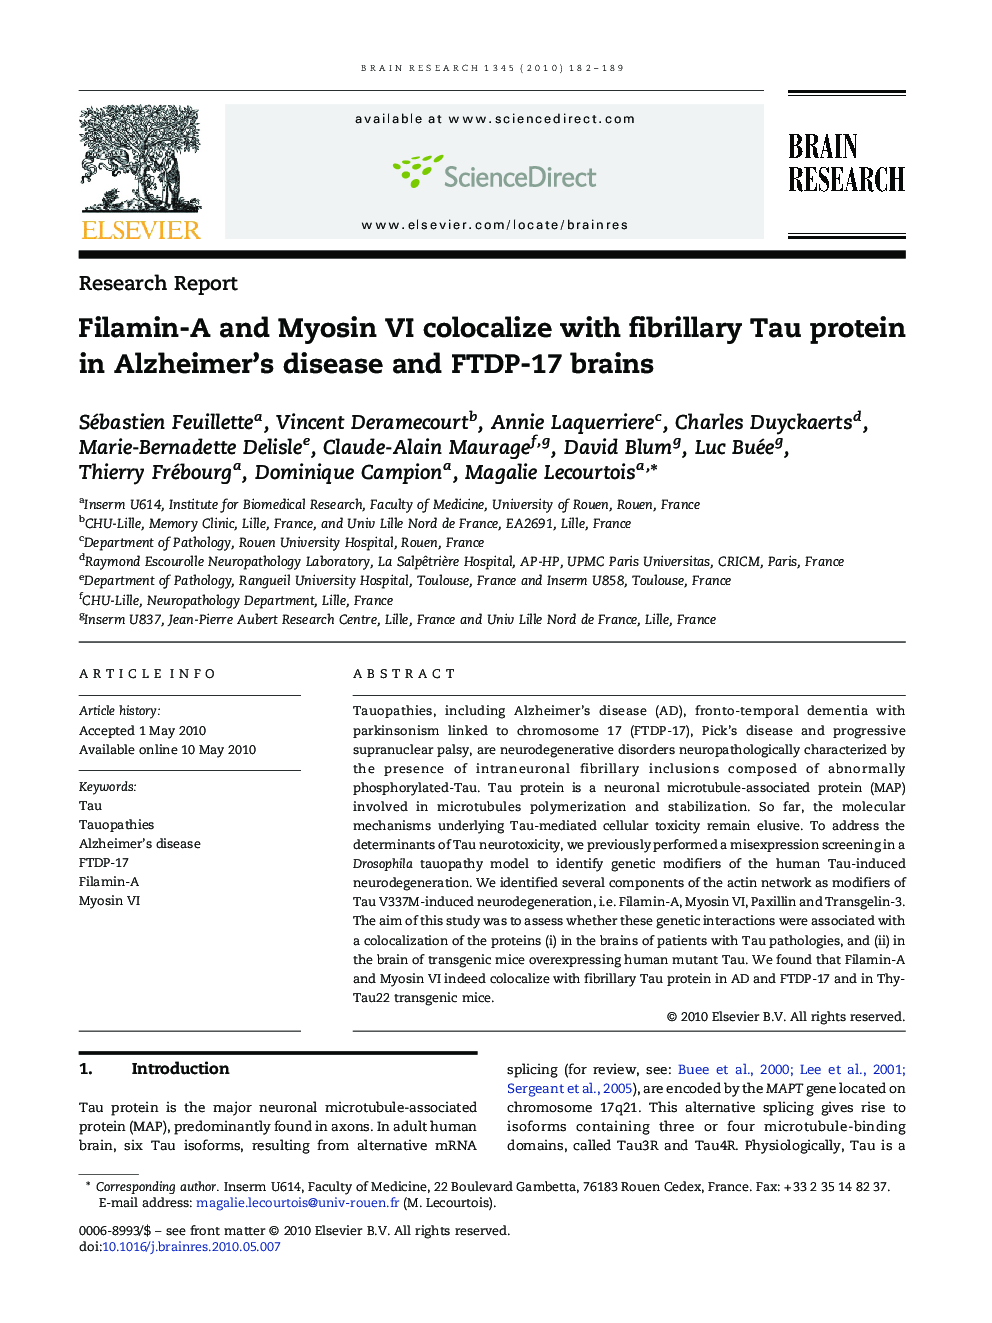 Filamin-A and Myosin VI colocalize with fibrillary Tau protein in Alzheimer's disease and FTDP-17 brains